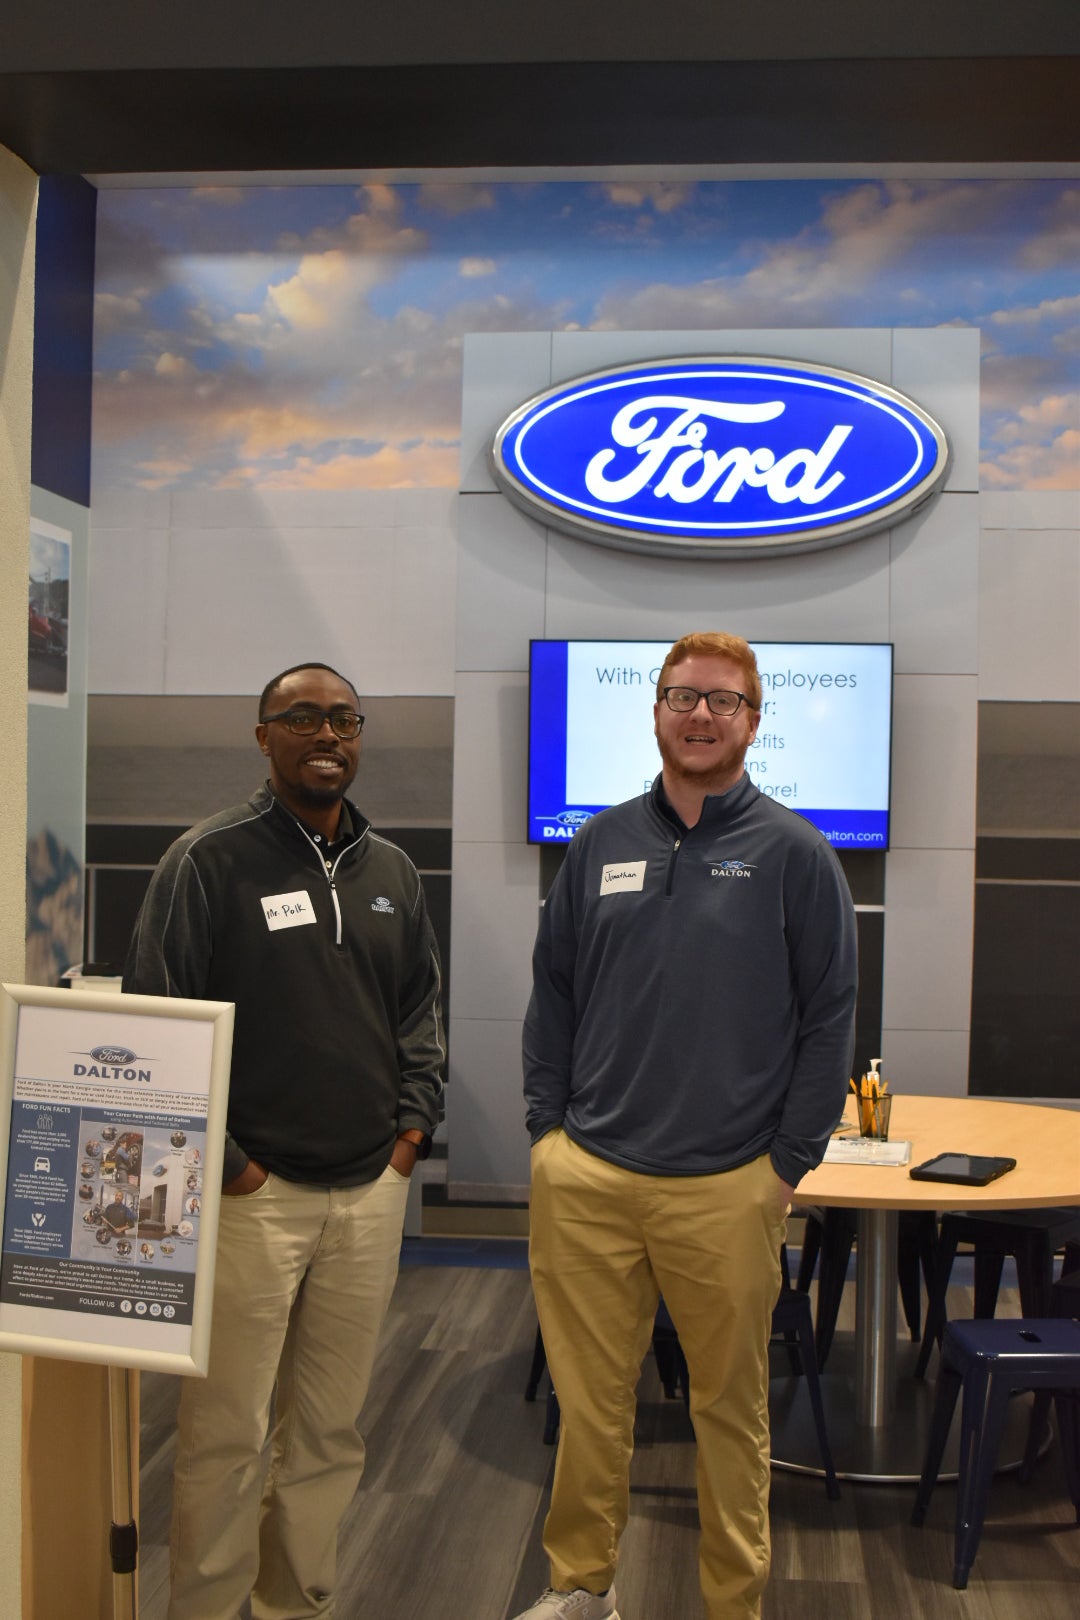 About Us | Ford of Dalton